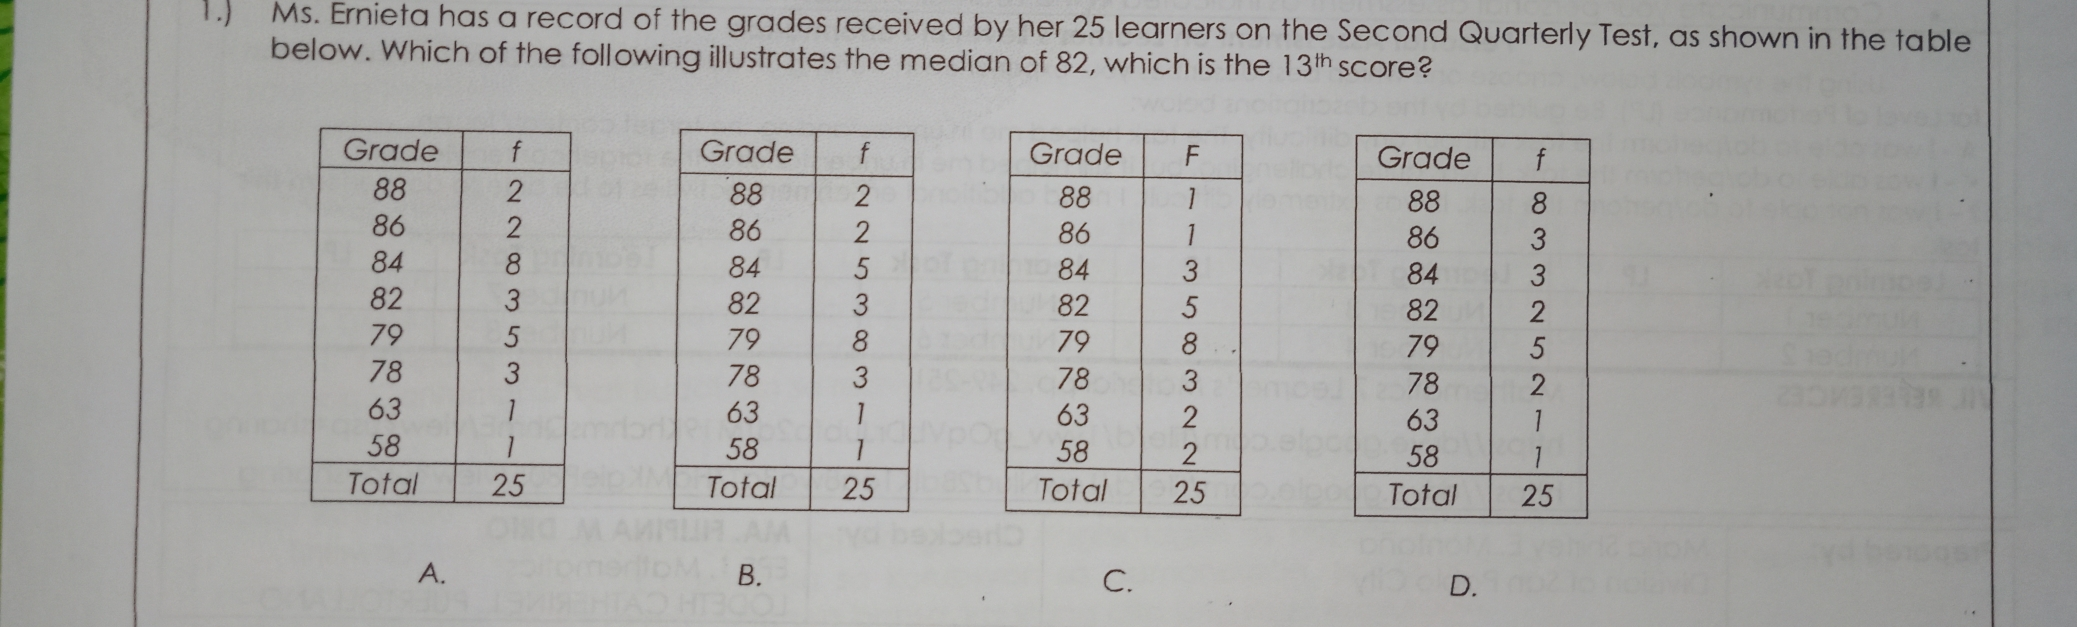 1. Ms. Ernieta has a record of the grades received by her 25 learners on the Second Quarterly Test, as shown in the table below. Which of the following illustrates the median of 82, which is the 13th score? A. B. C. D.